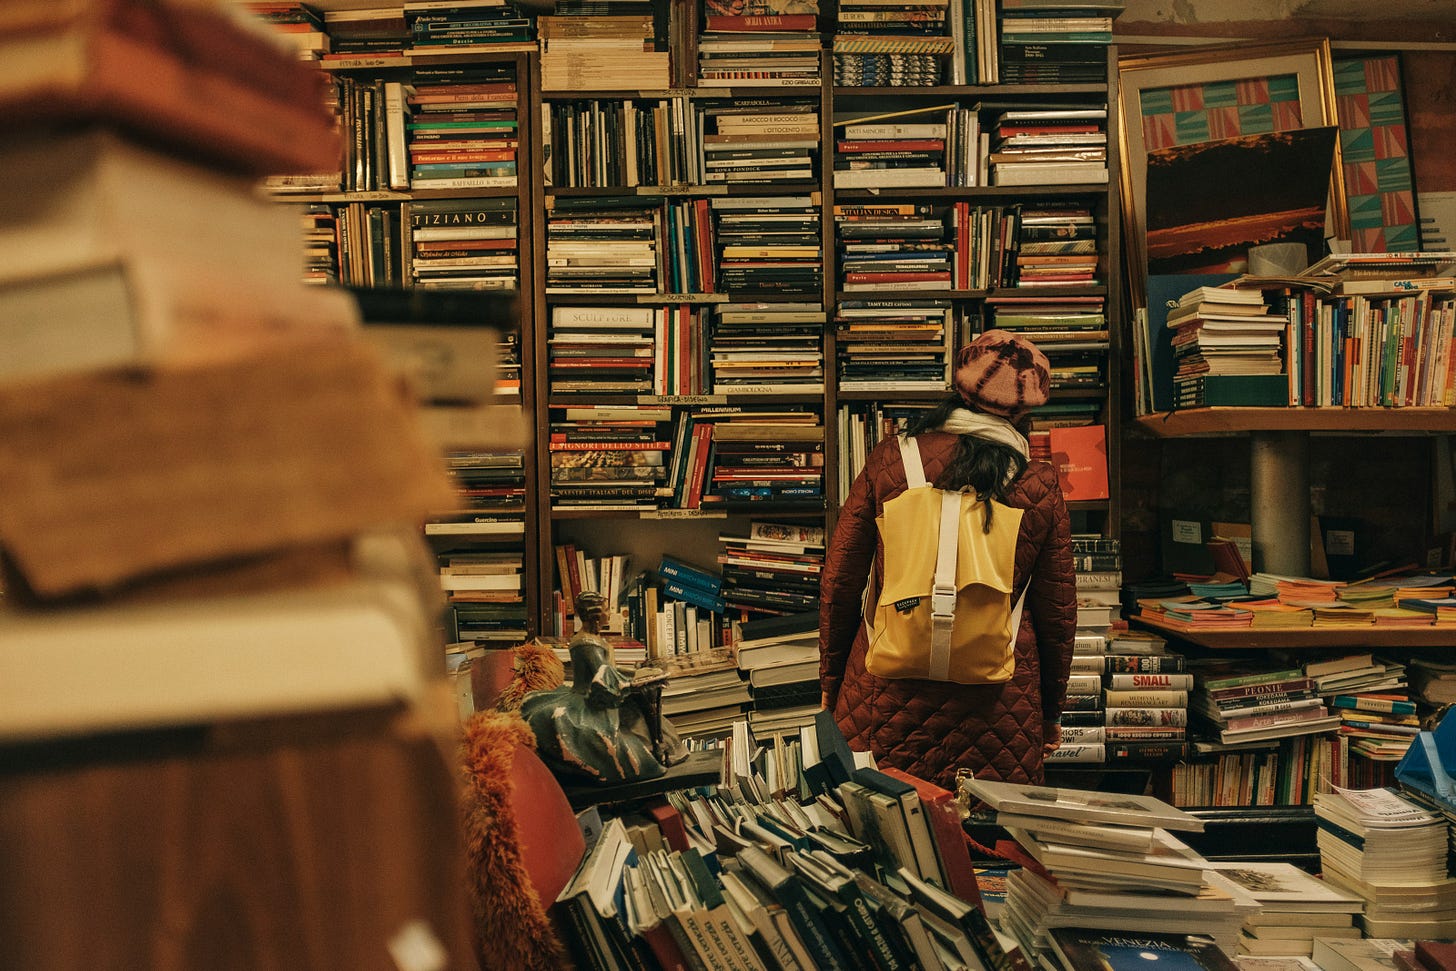 A photo of a second hand book store, shelved piled high with old books are everywhere and a lady with a yellow backpack is looking intently at one of the shelves, with her back to the camera.